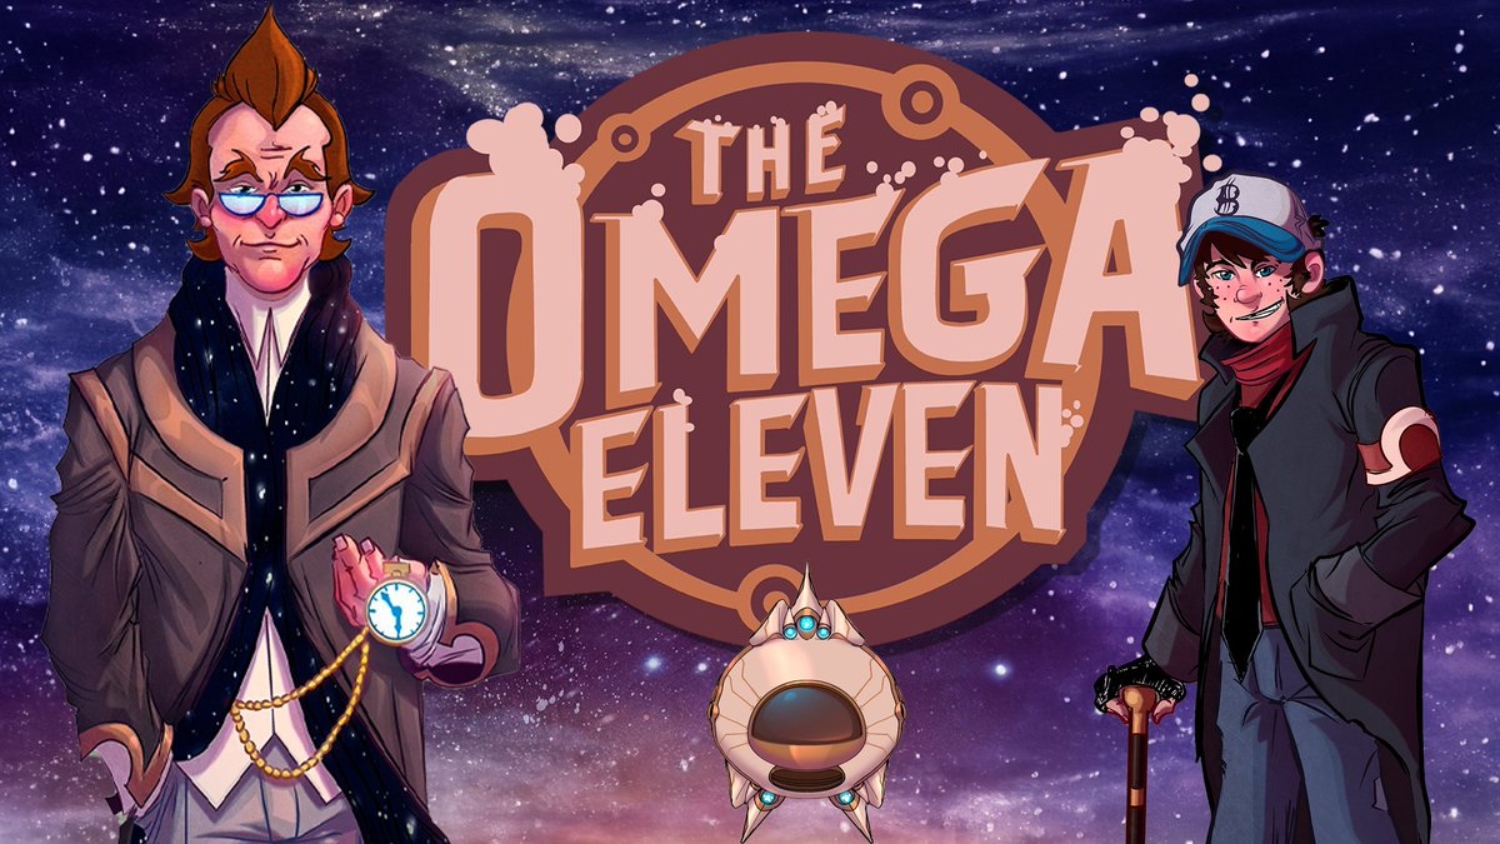 James Aquilone and Zac Atkinson break down time traveling heist story 'The Omega Eleven'